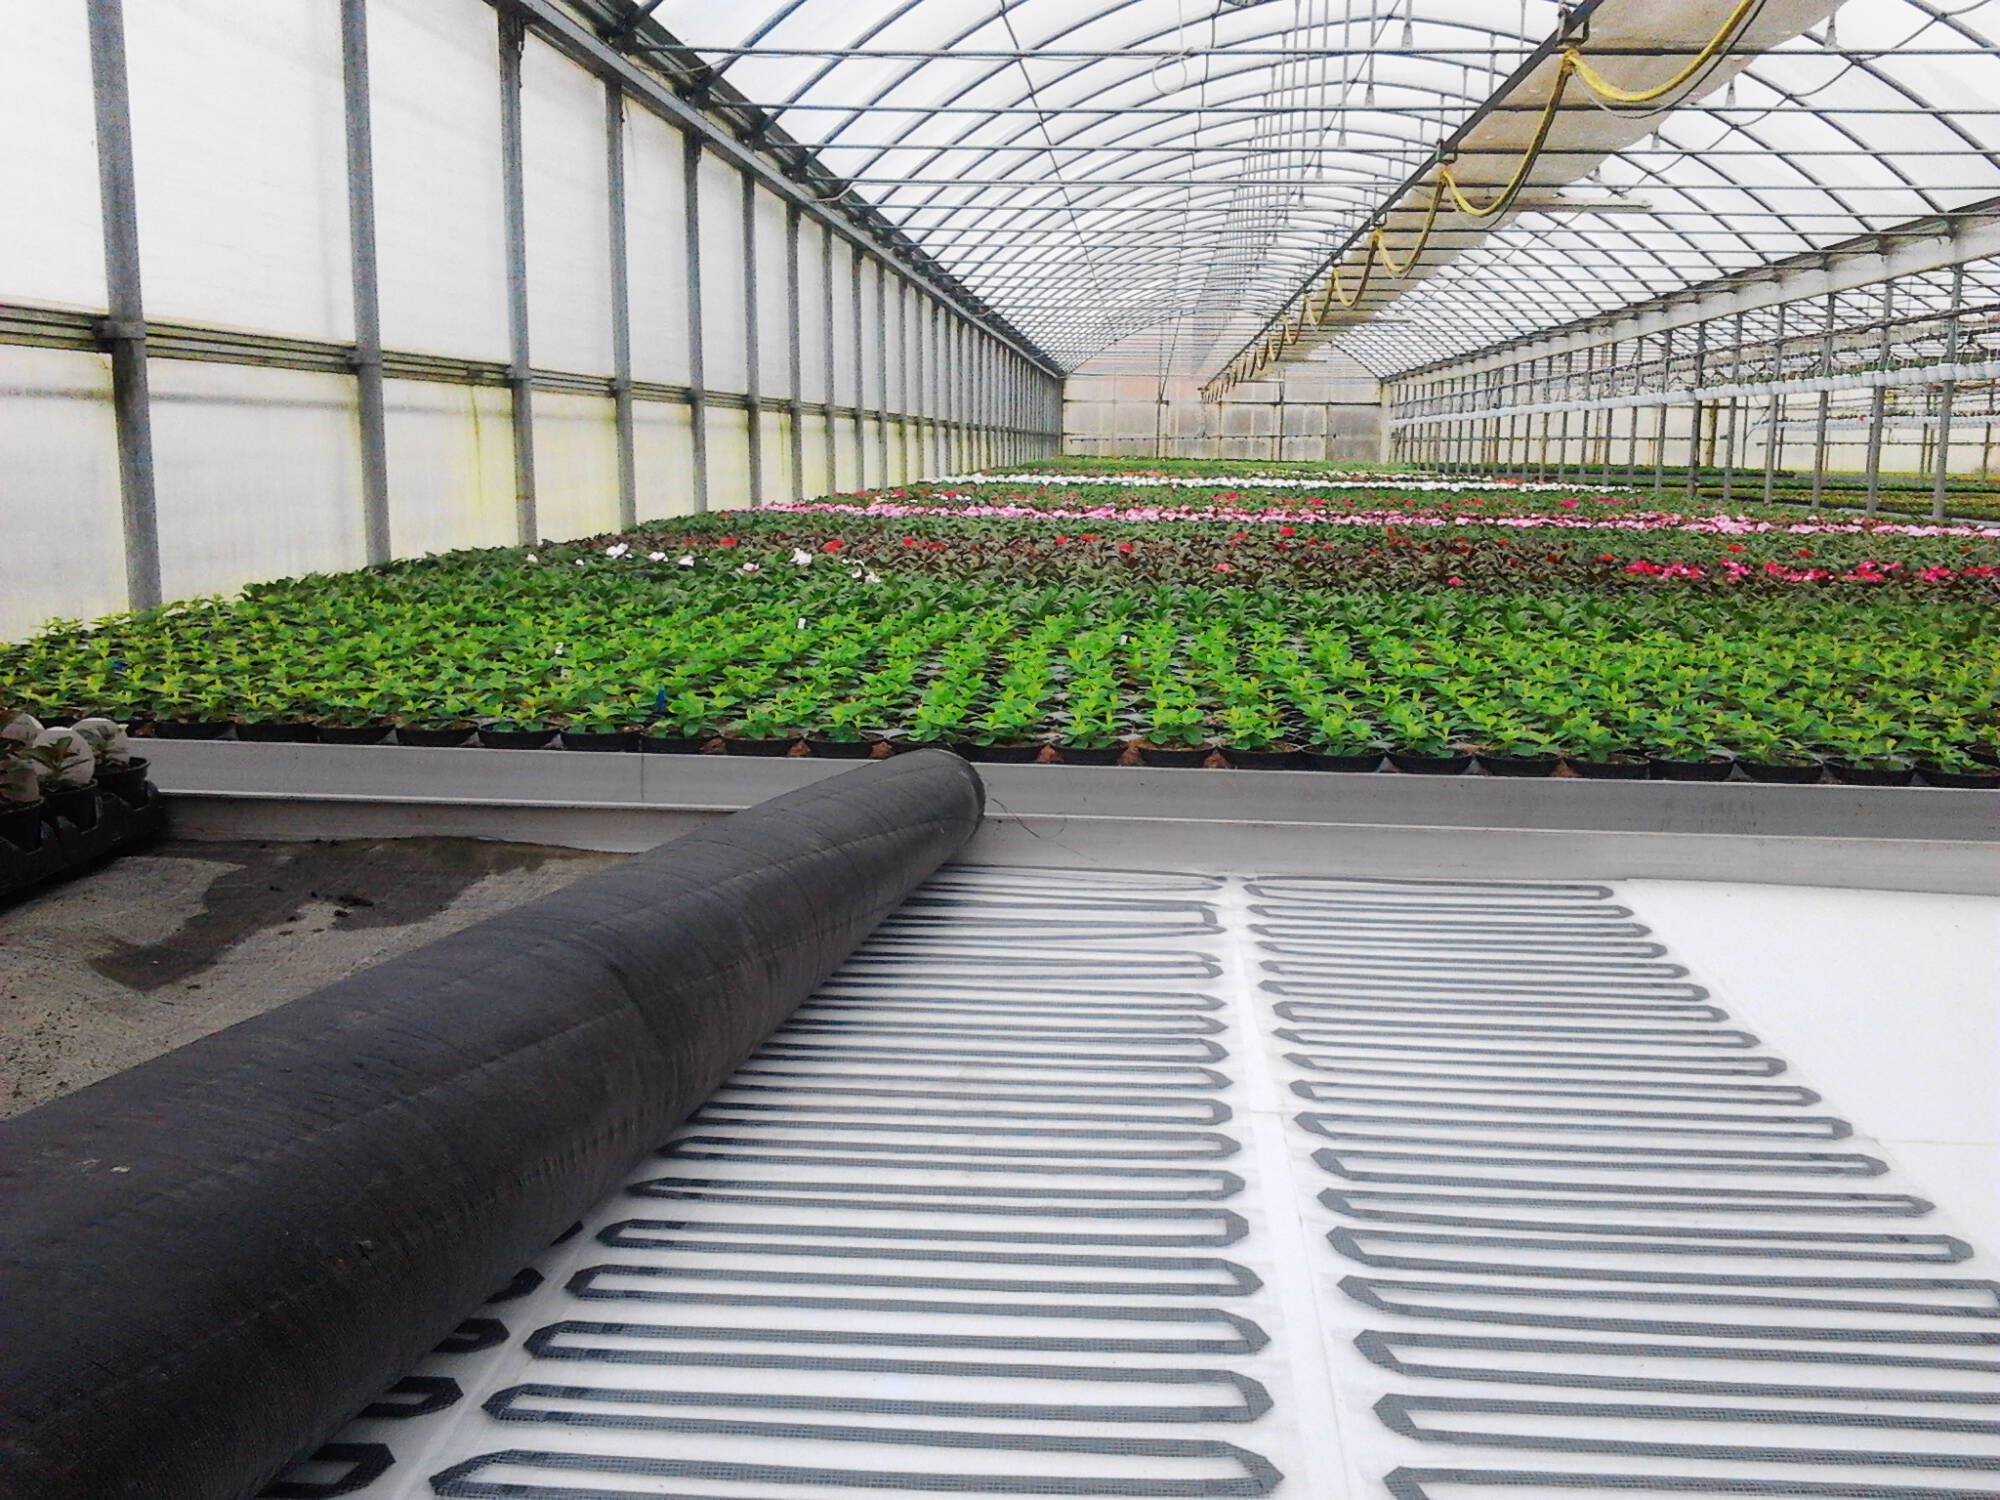 Planting tables can be quickly and easily equipped with a heating mat